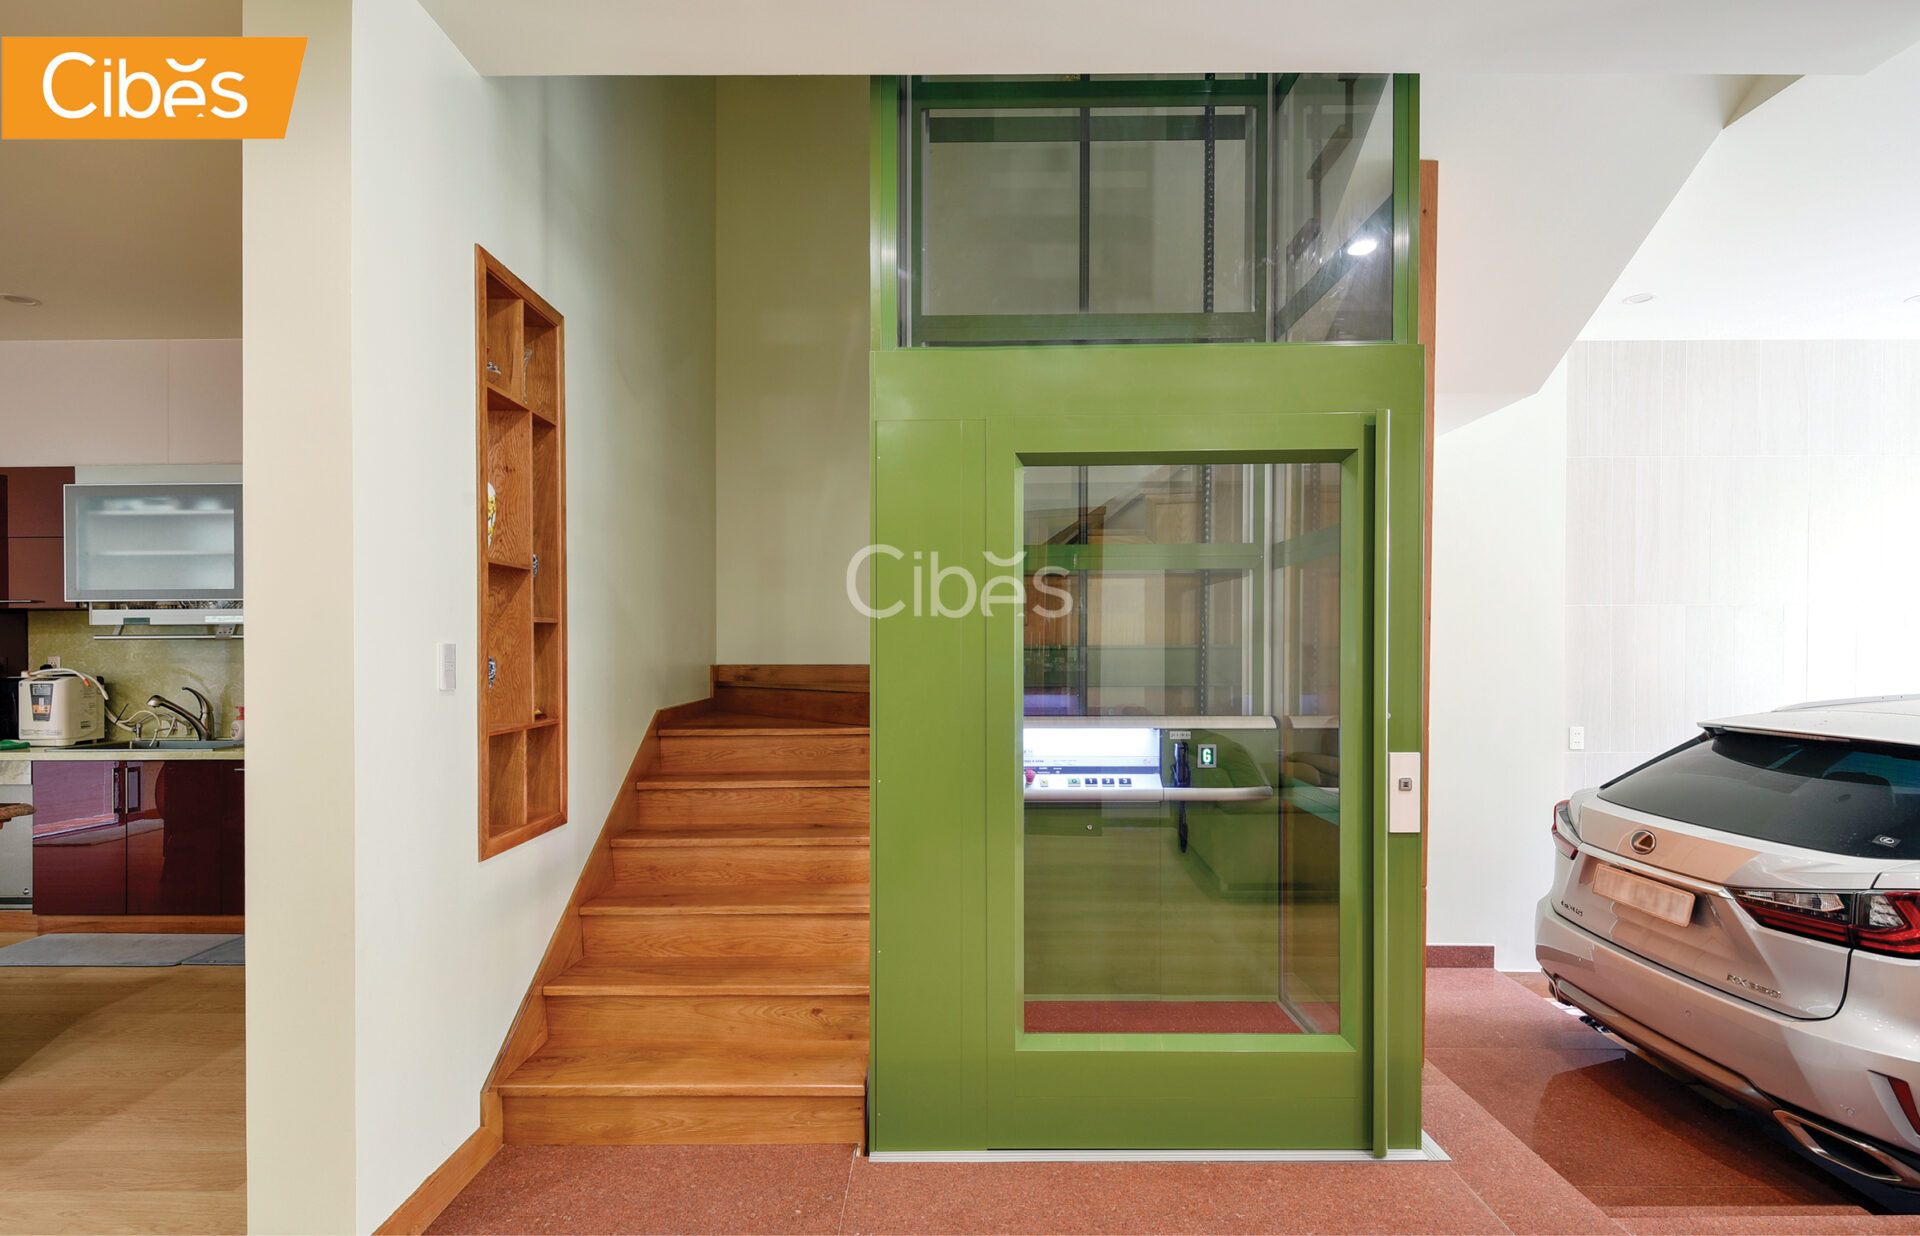 HOME LIFTS – Middle of stairs clas23